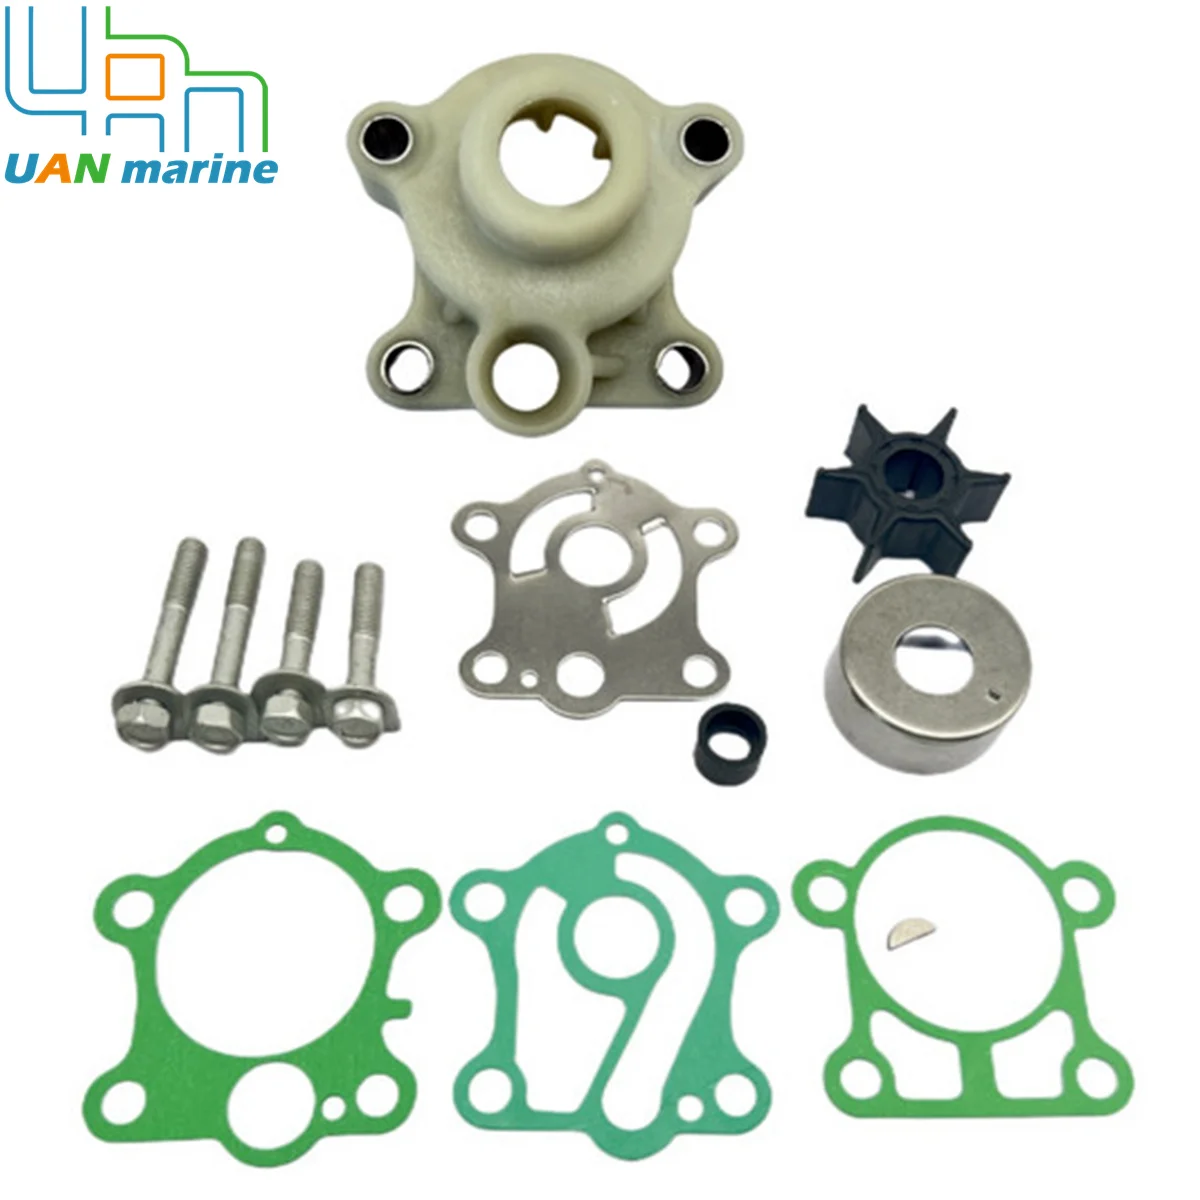 6H4-W0078  Water Pump Impeller Repair Kit With Housing  For Yamaha 2 stroke 40HP 50HP  Outboard  6H4-W0078-00-00  6H4-W0078-A0